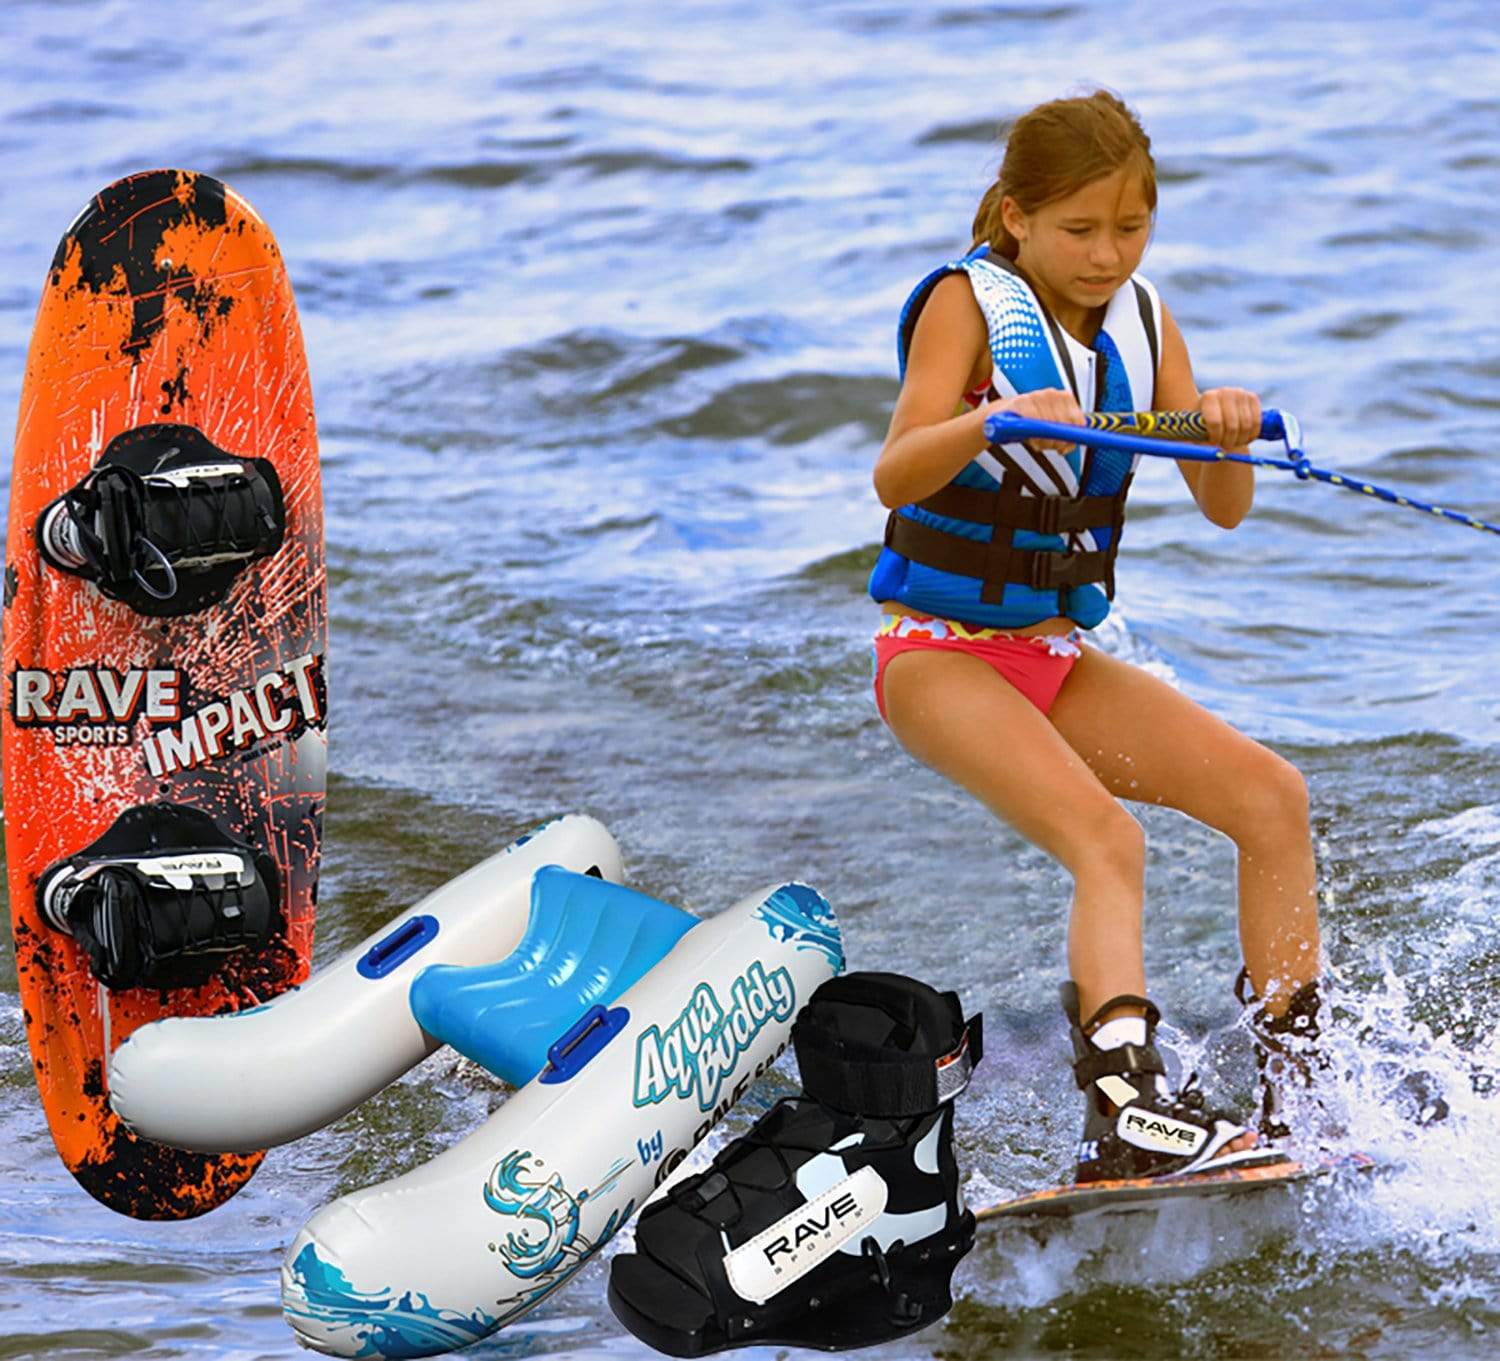 RAVE Wakeboards and Bindings Wakeboard Starter Package